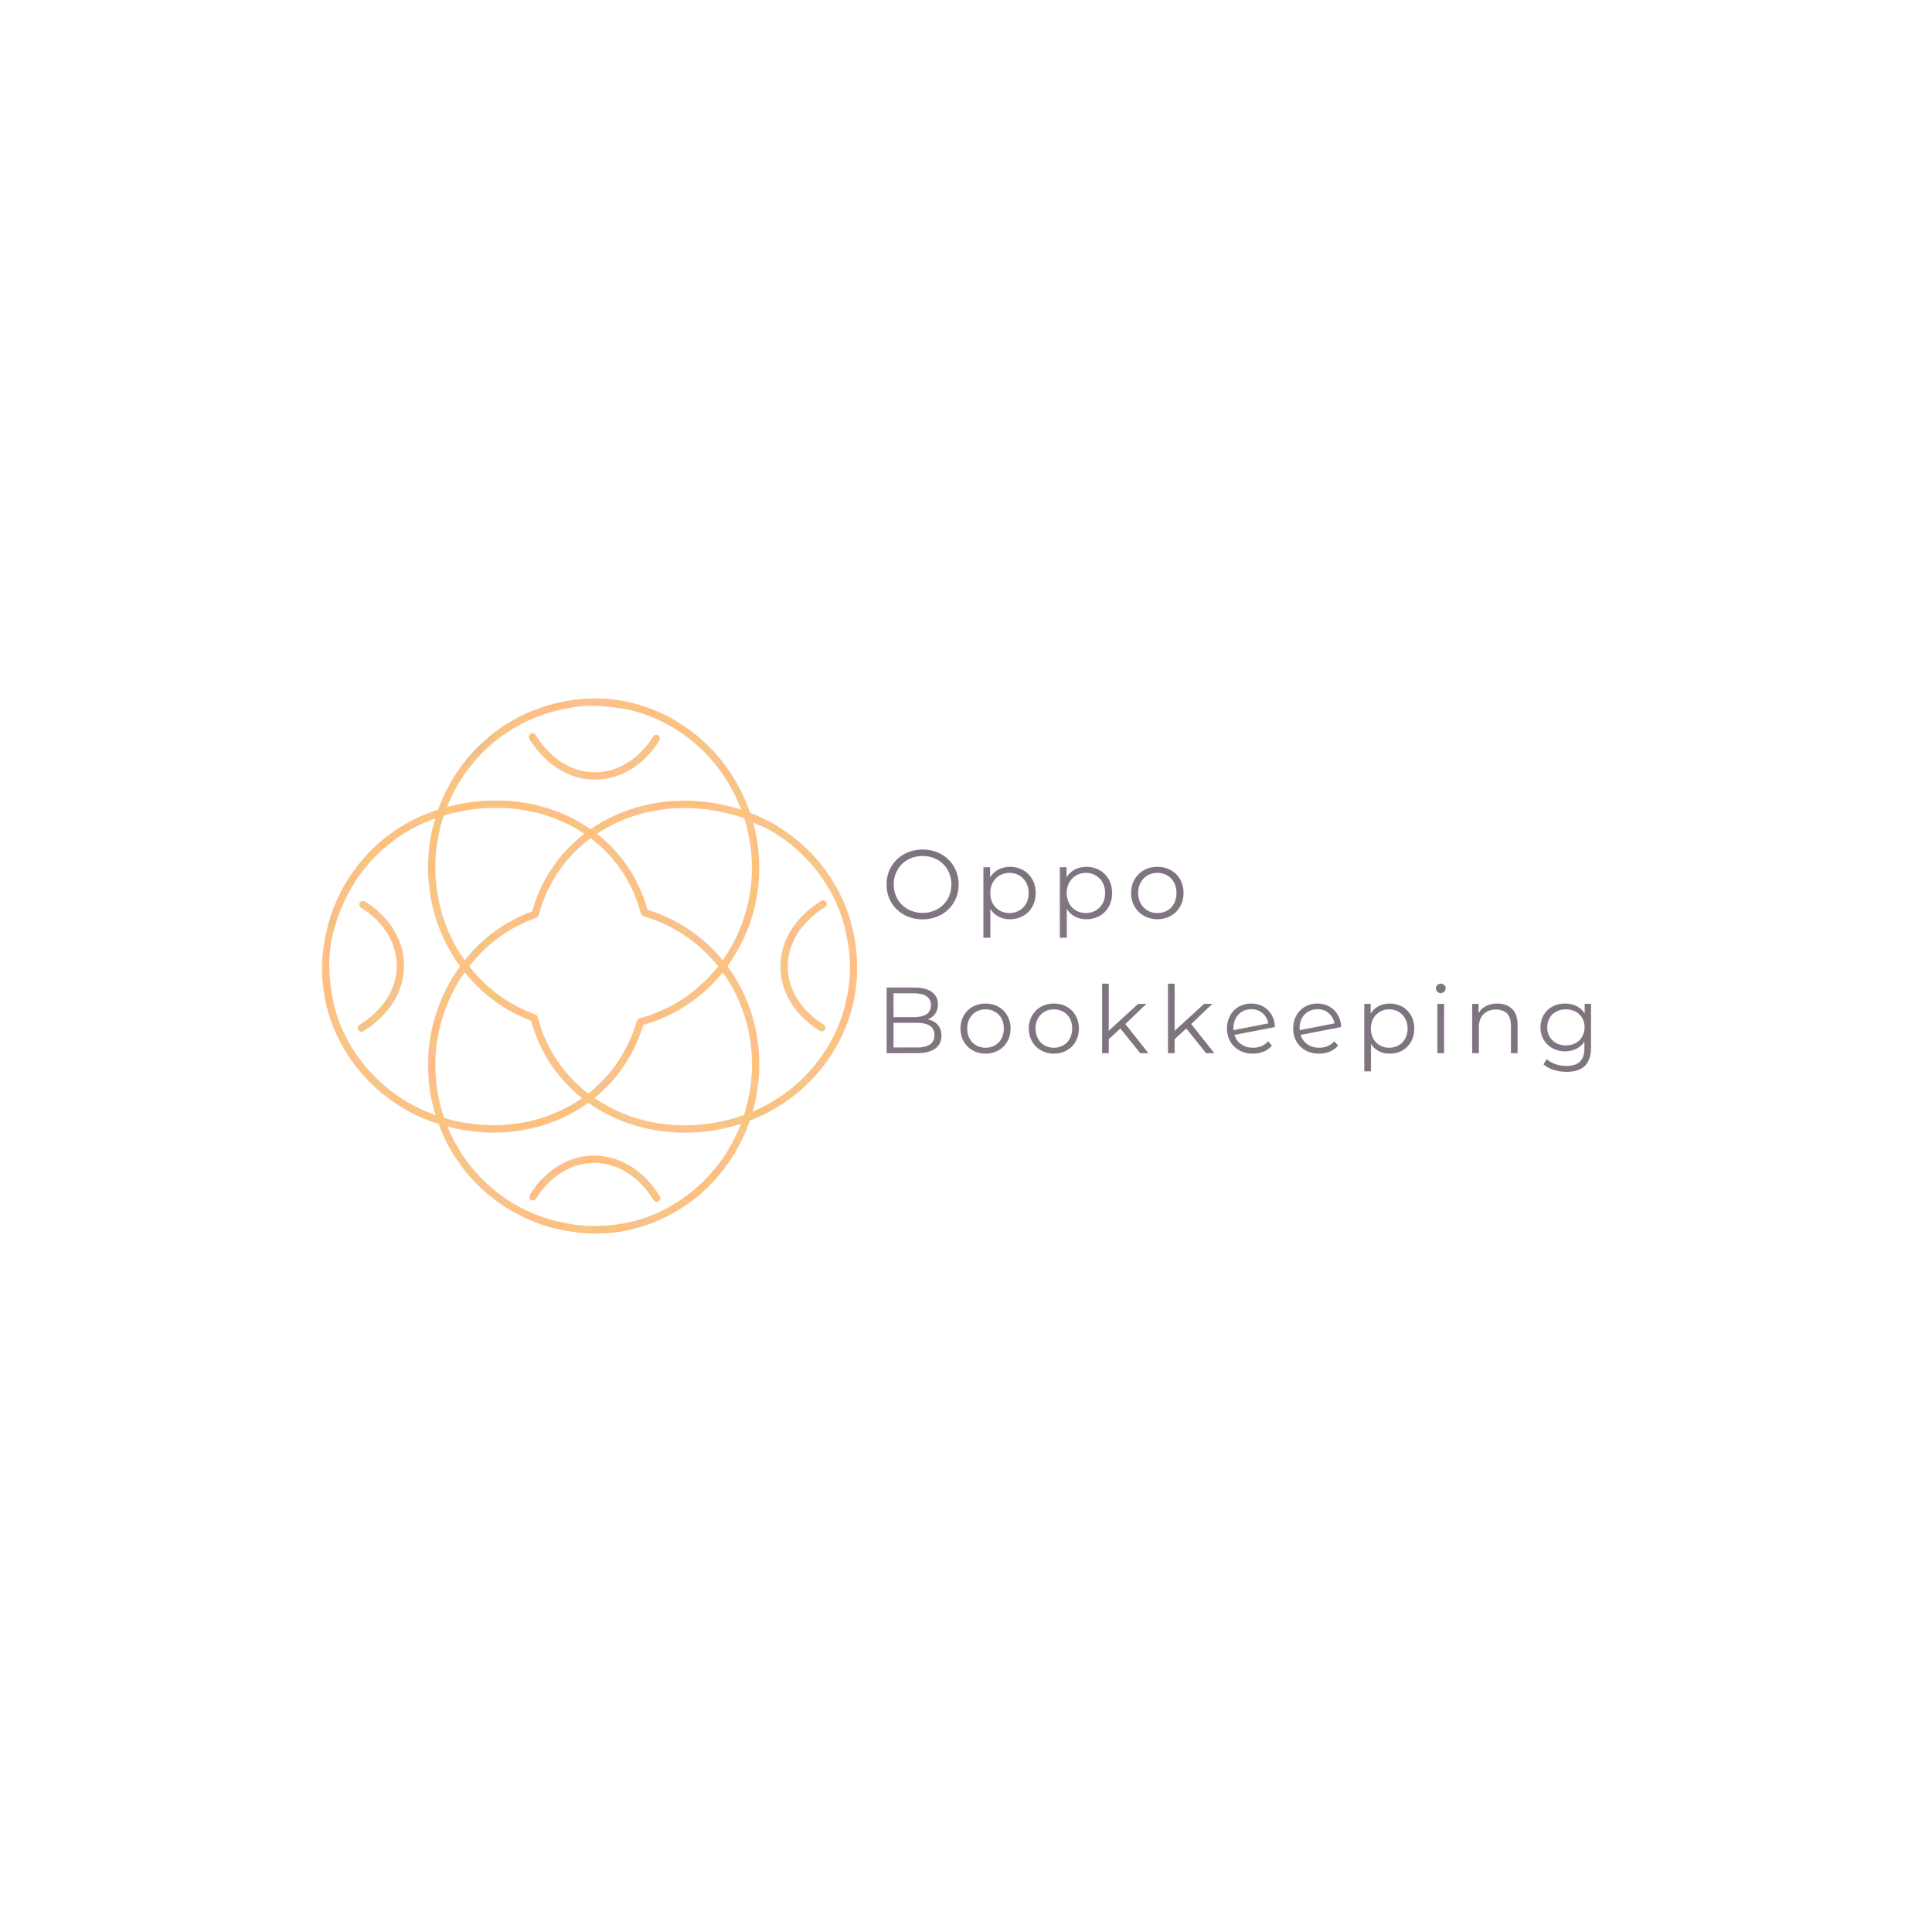 Oppo Bookkeeping